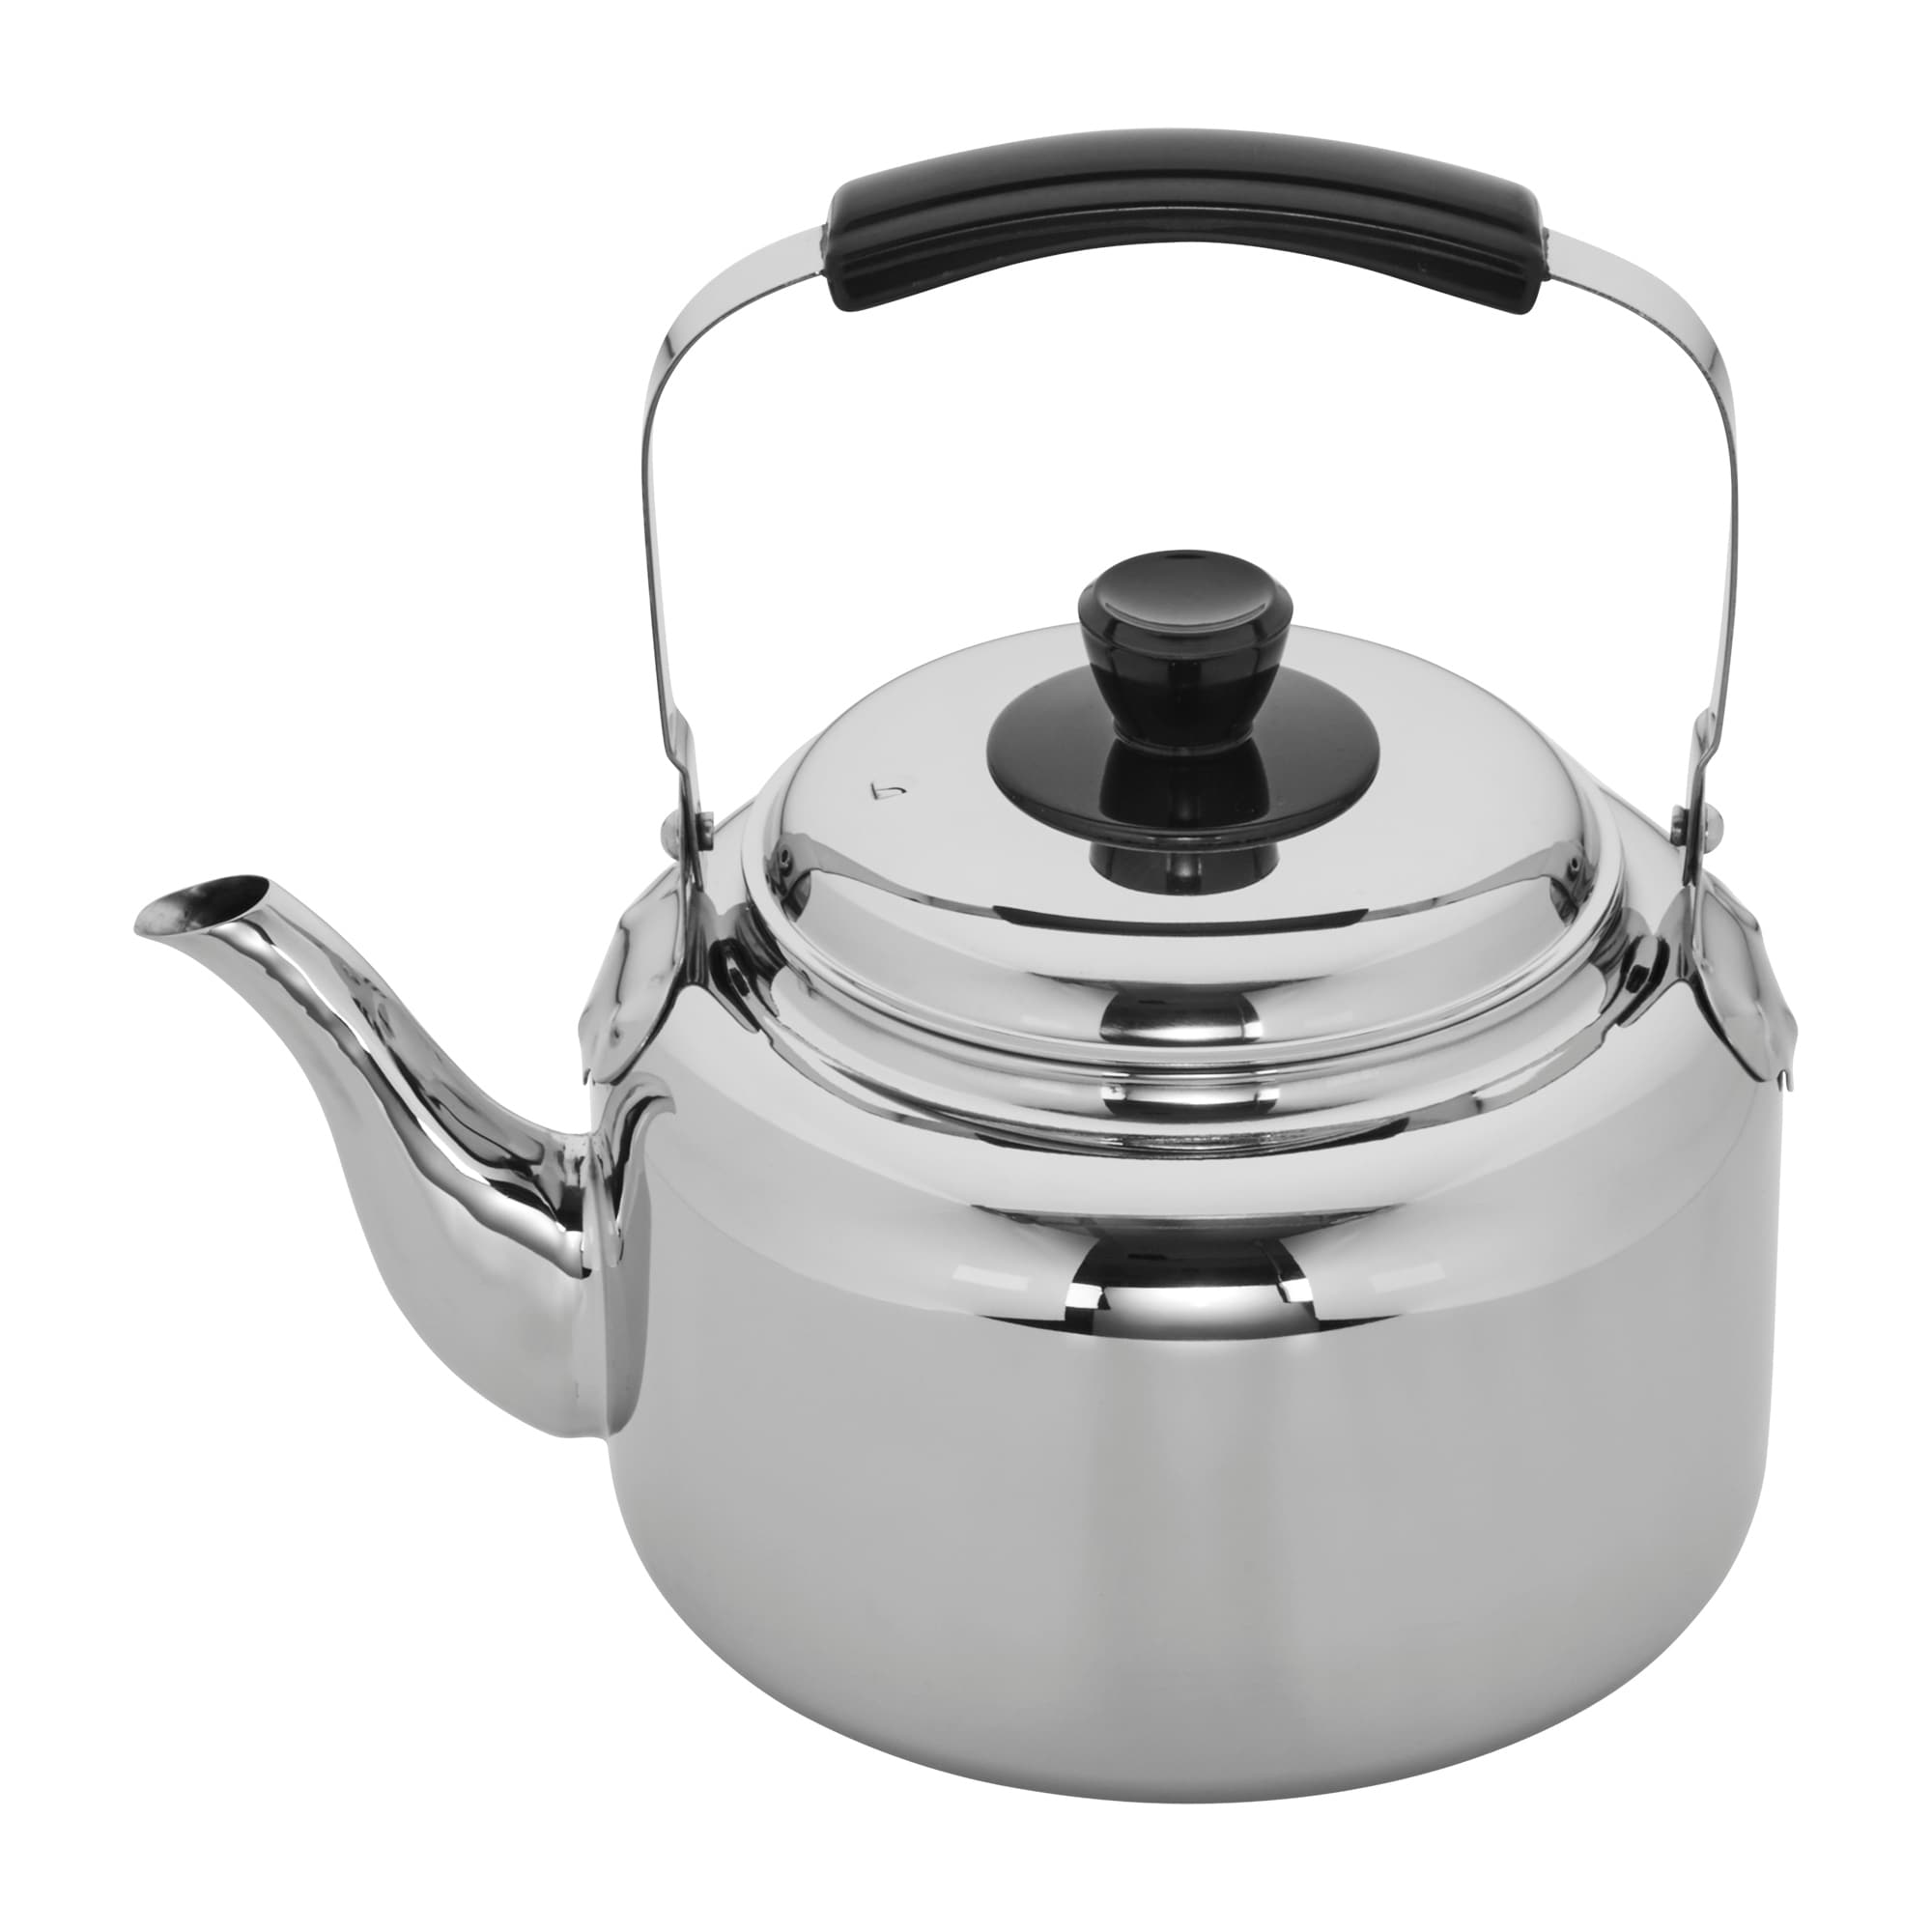 https://ak1.ostkcdn.com/images/products/is/images/direct/307adcf3f88585a749aee02f09692988793c96e3/Demeyere-Resto-Stainless-Steel-Tea-Kettle.jpg